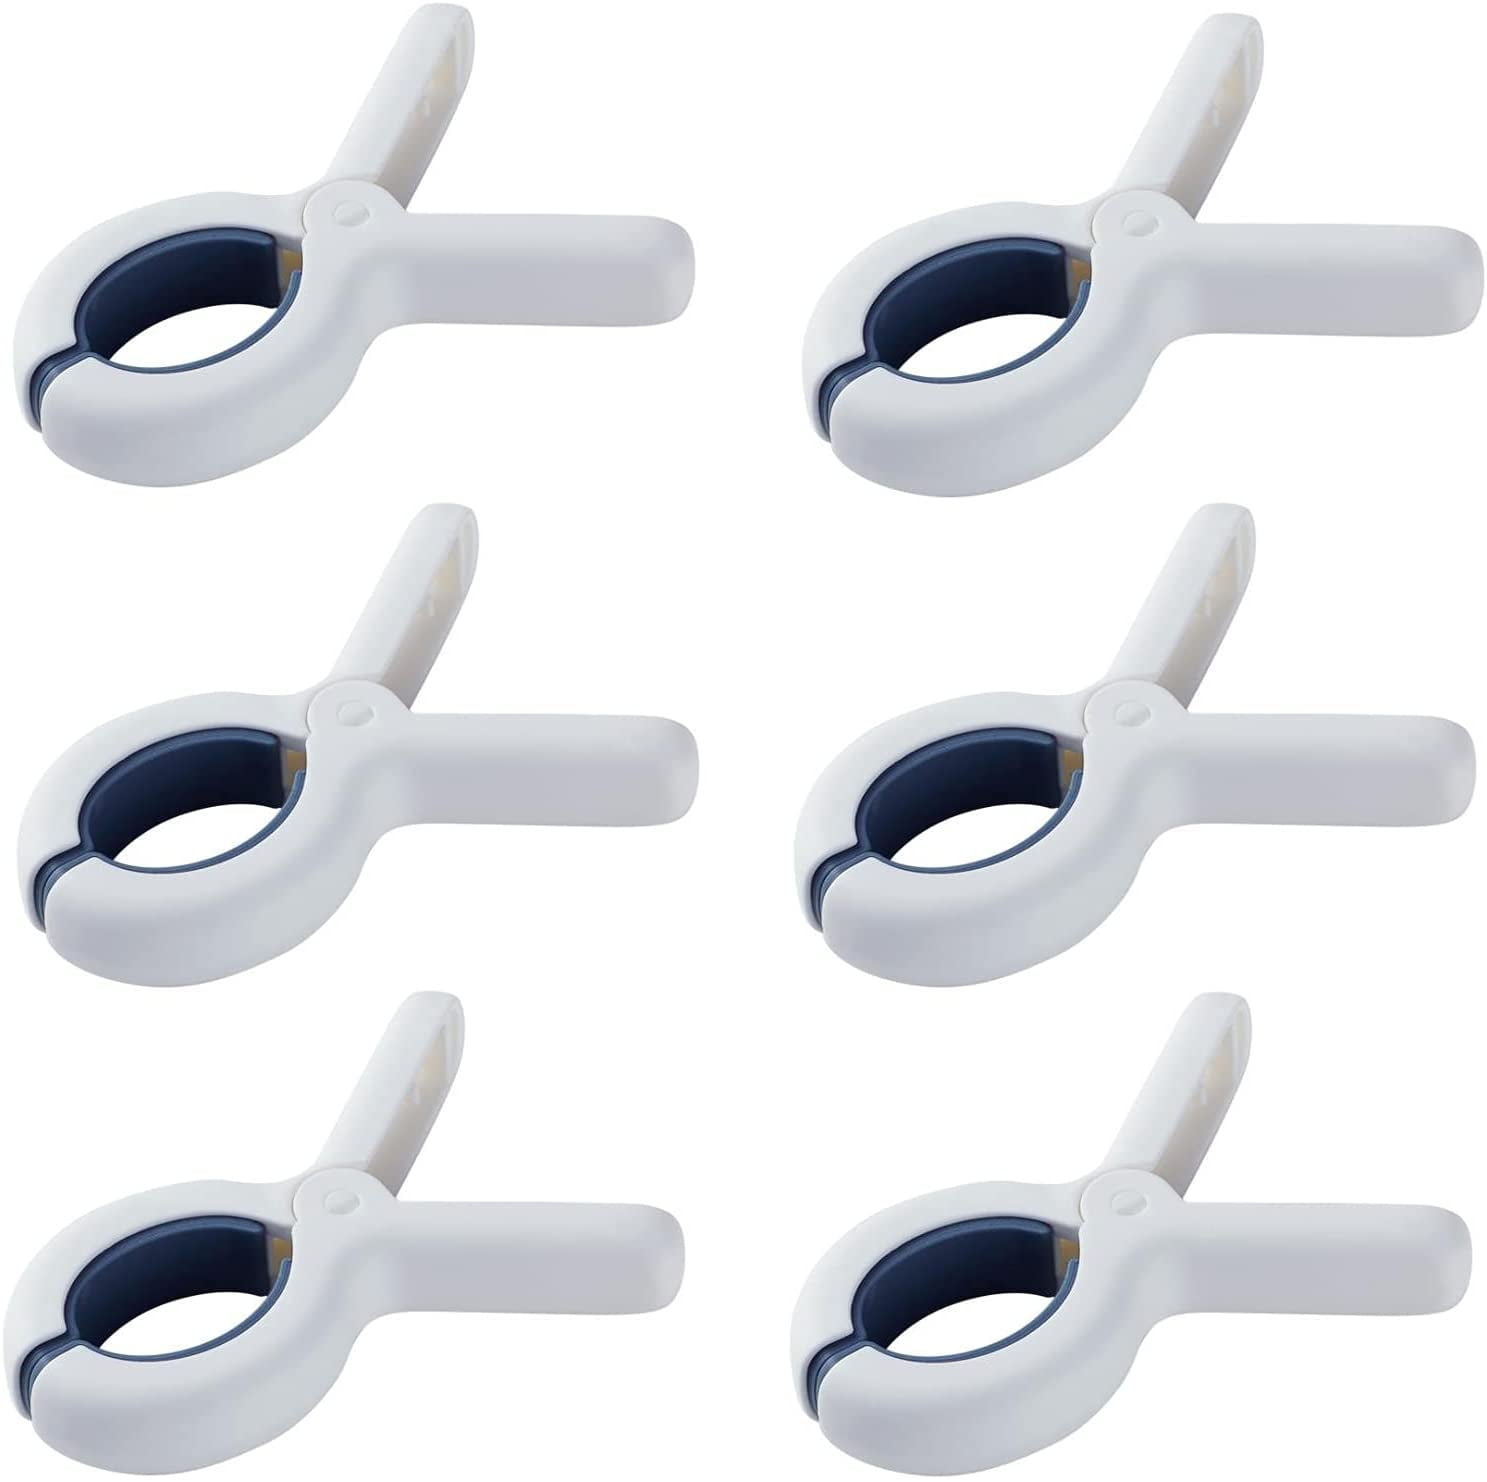 30 Heavy Duty Plastic Clothes Pins Clothespins Laundry Clips Bag Hangs Clothing for sale online 